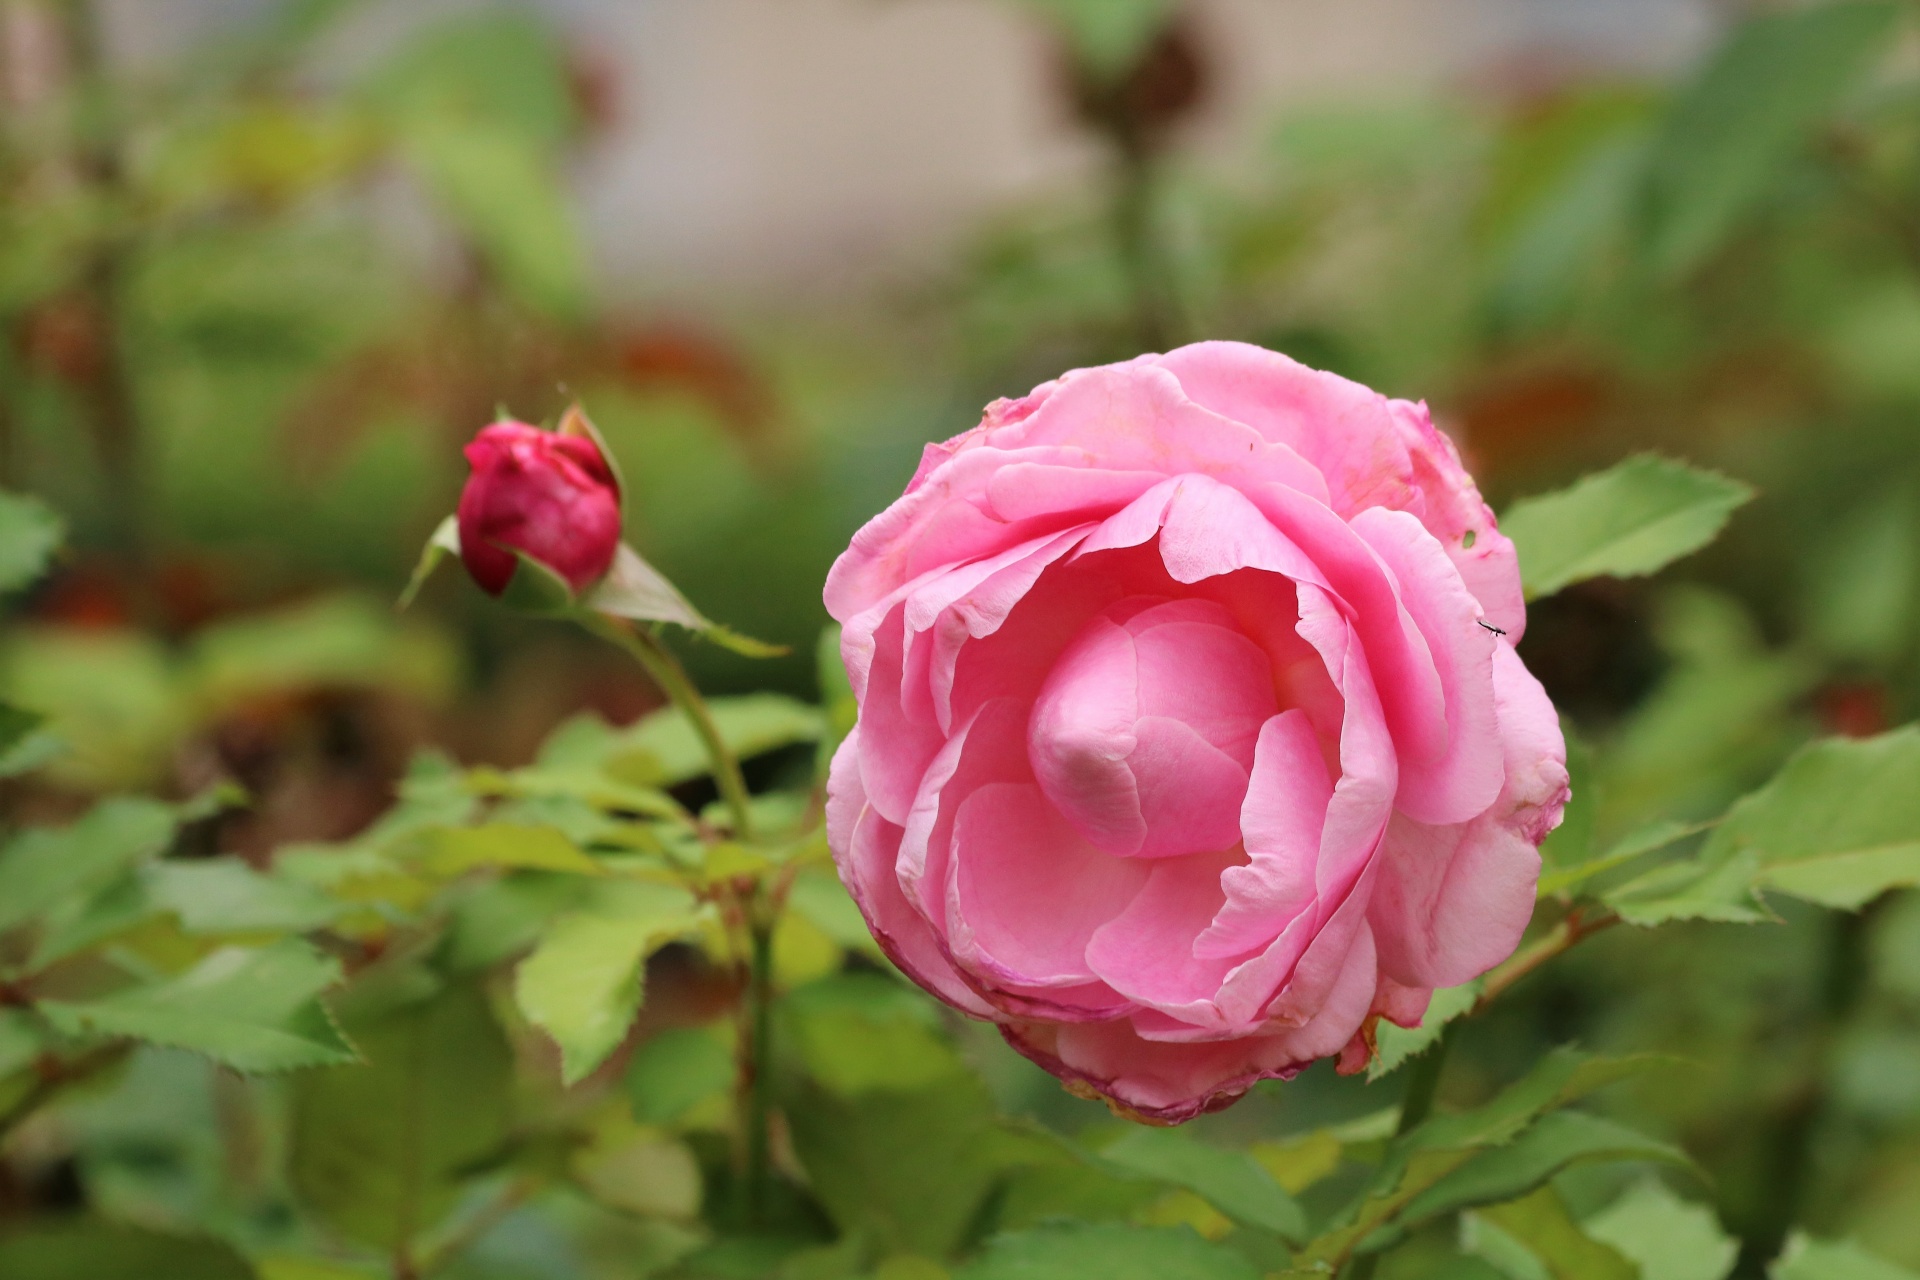 Close-up of a pink rose, not yet fully bloomed and a rose bud on a blurred green background.